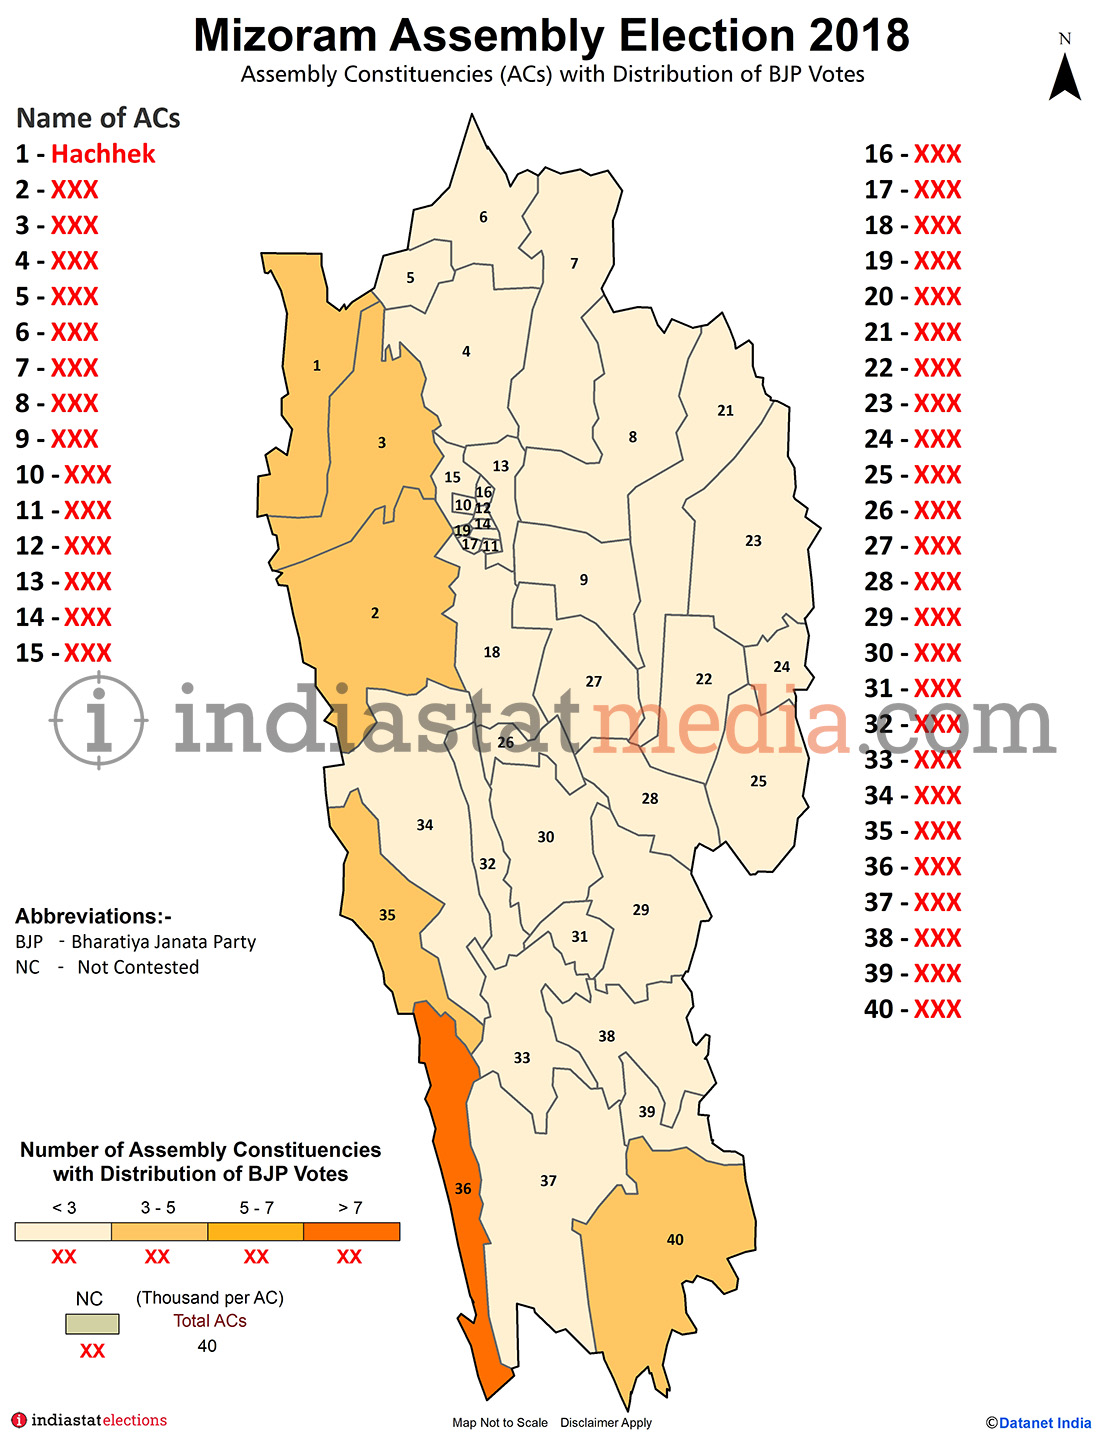 Distribution of BJP Votes by Constituencies in Mizoram (Assembly Election - 2018)